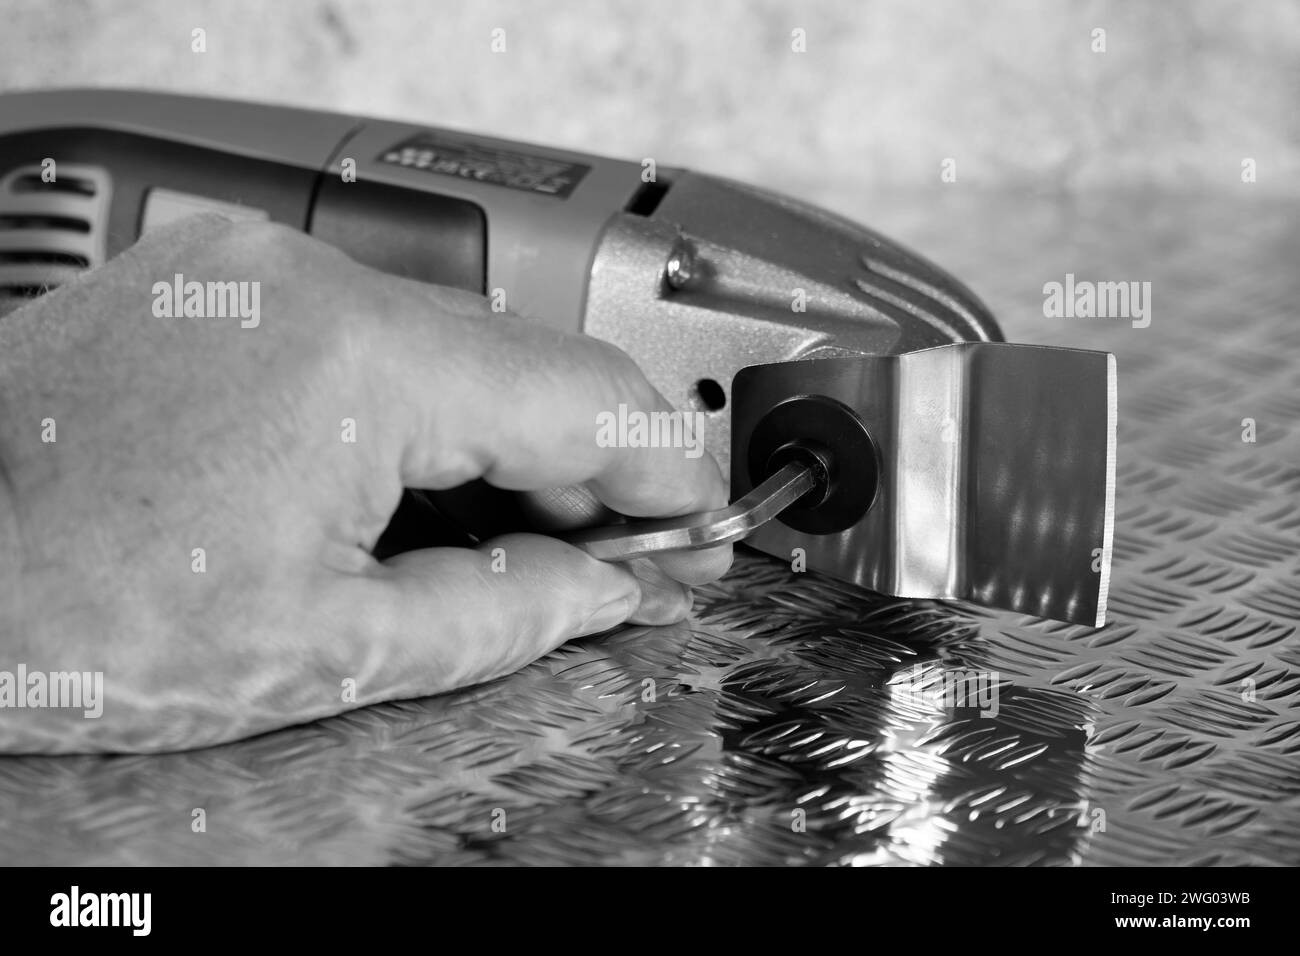 Man attaching cutting blade on an electric multi tool cutter sander. On a checker plate surface. Stock Photo